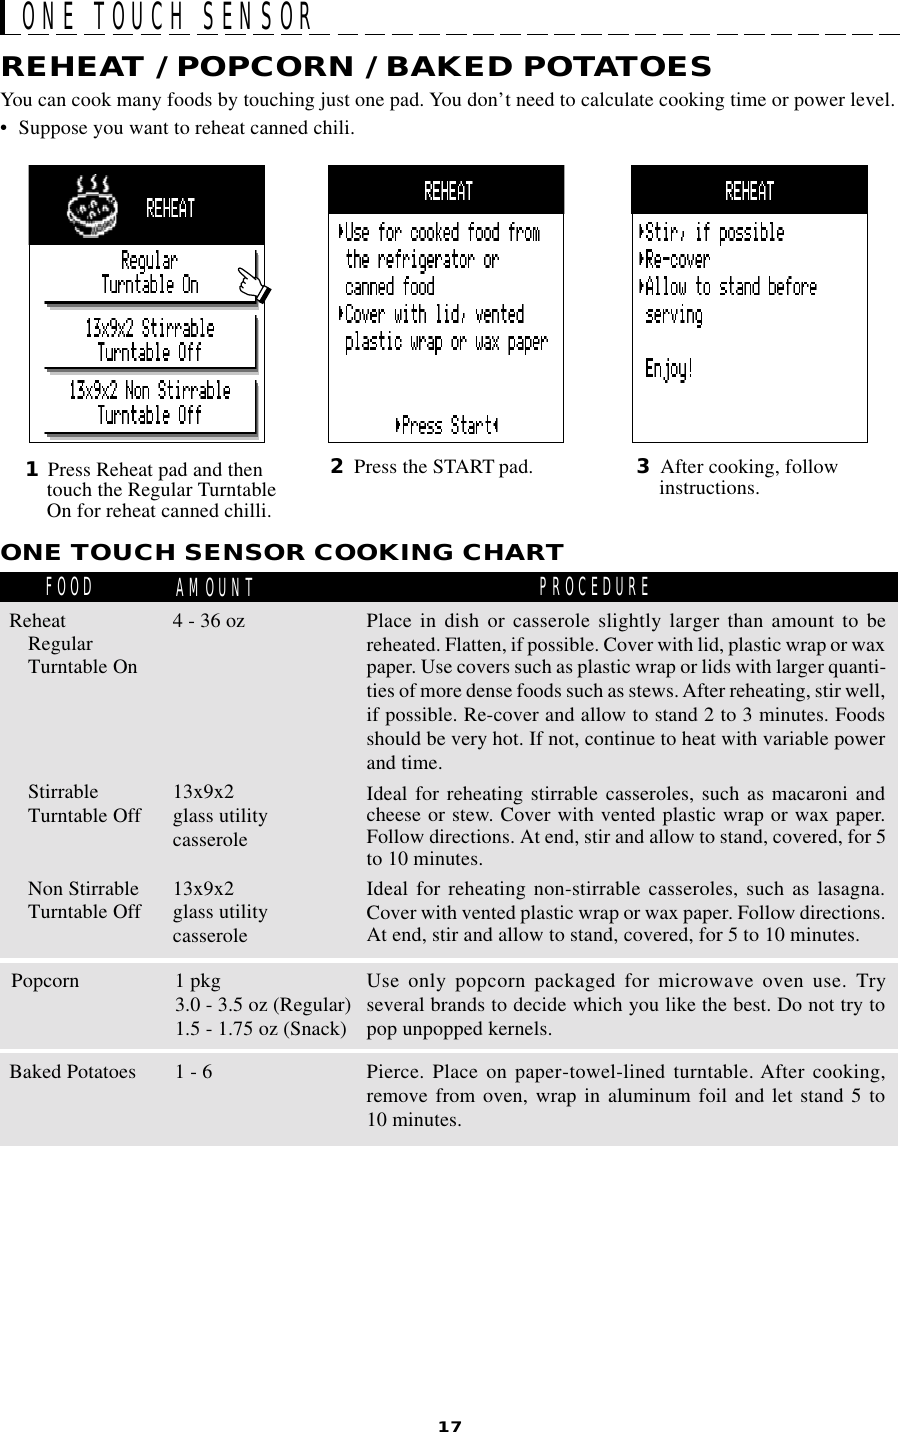 17ONE TOUCH SENSORONE TOUCH SENSOR COOKING CHARTPopcorn 1 pkg3.0 - 3.5 oz (Regular)1.5 - 1.75 oz (Snack)Baked Potatoes 1 - 6ReheatRegularTurntable On4 - 36 ozFOOD AMOUNT PROCEDUREStirrableTurntable Off 13x9x2glass utilitycasseroleNon StirrableTurntable Off 13x9x2glass utilitycasseroleUse only popcorn packaged for microwave oven use. Tryseveral brands to decide which you like the best. Do not try topop unpopped kernels.Pierce. Place on paper-towel-lined turntable. After cooking,remove from oven, wrap in aluminum foil and let stand 5 to10 minutes.Place in dish or casserole slightly larger than amount to bereheated. Flatten, if possible. Cover with lid, plastic wrap or waxpaper. Use covers such as plastic wrap or lids with larger quanti-ties of more dense foods such as stews. After reheating, stir well,if possible. Re-cover and allow to stand 2 to 3 minutes. Foodsshould be very hot. If not, continue to heat with variable powerand time.Ideal for reheating stirrable casseroles, such as macaroni andcheese or stew. Cover with vented plastic wrap or wax paper.Follow directions. At end, stir and allow to stand, covered, for 5to 10 minutes.Ideal for reheating non-stirrable casseroles, such as lasagna.Cover with vented plastic wrap or wax paper. Follow directions.At end, stir and allow to stand, covered, for 5 to 10 minutes.REHEAT / POPCORN / BAKED POTATOESYou can cook many foods by touching just one pad. You don’t need to calculate cooking time or power level.• Suppose you want to reheat canned chili.3After cooking, followinstructions.2Press the START pad.1Press Reheat pad and thentouch the Regular TurntableOn for reheat canned chilli.